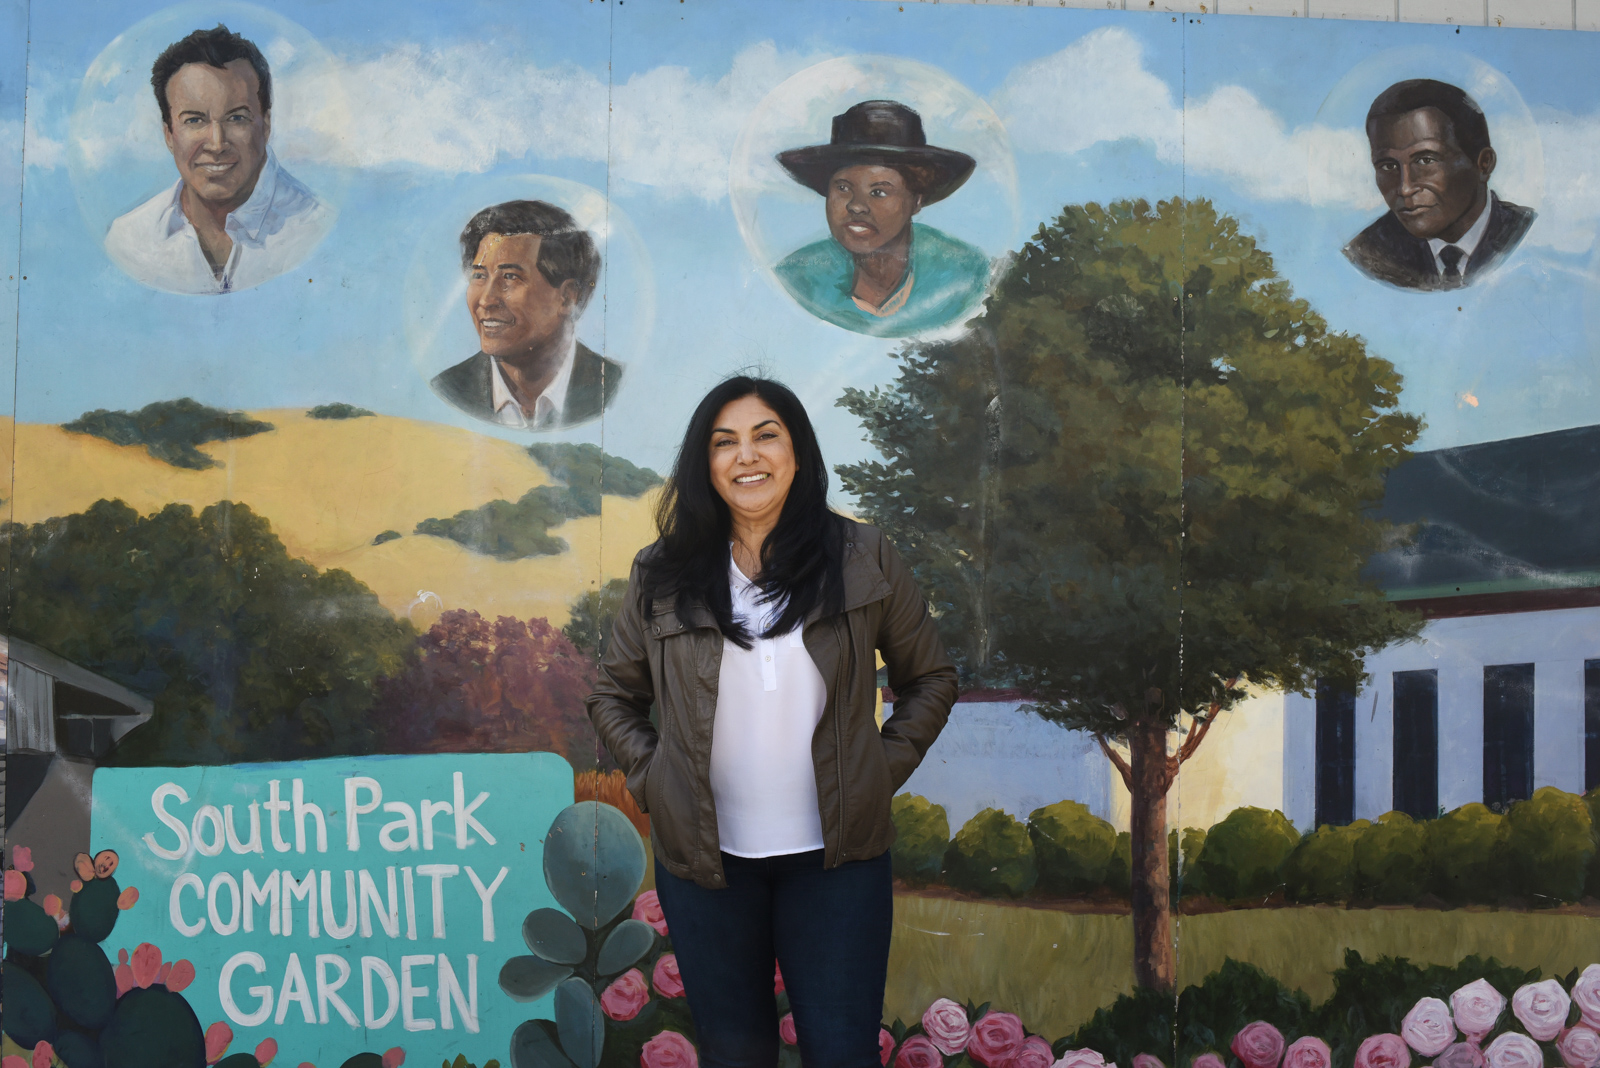 Breaking barriers and making an impact: Community Action Partnership of Sonoma County